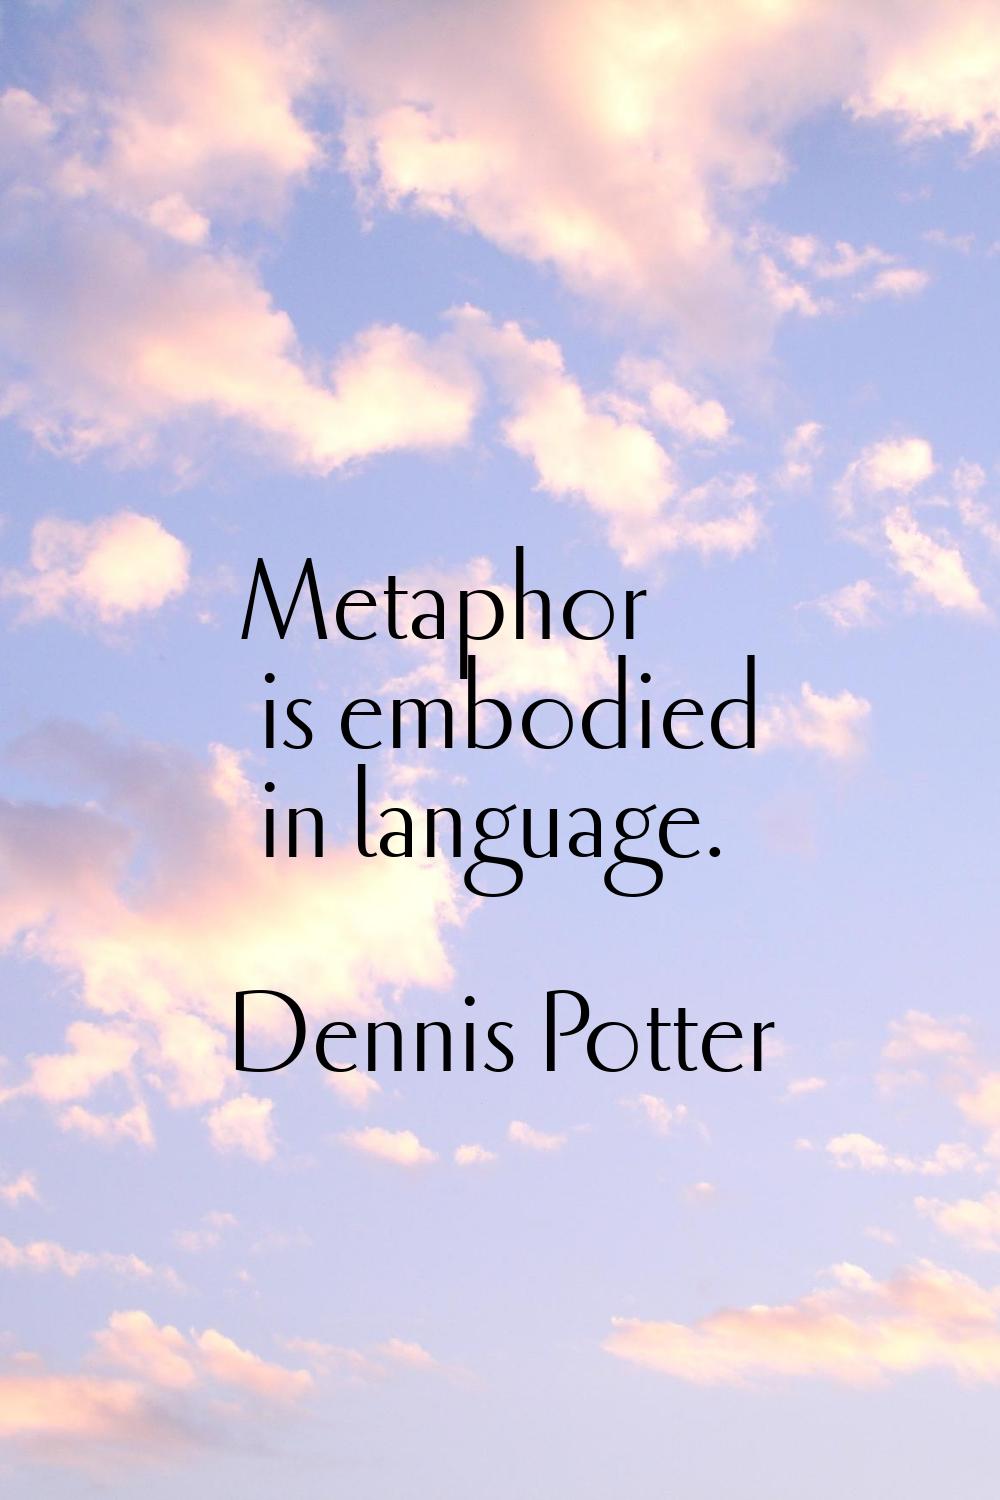 Metaphor is embodied in language.